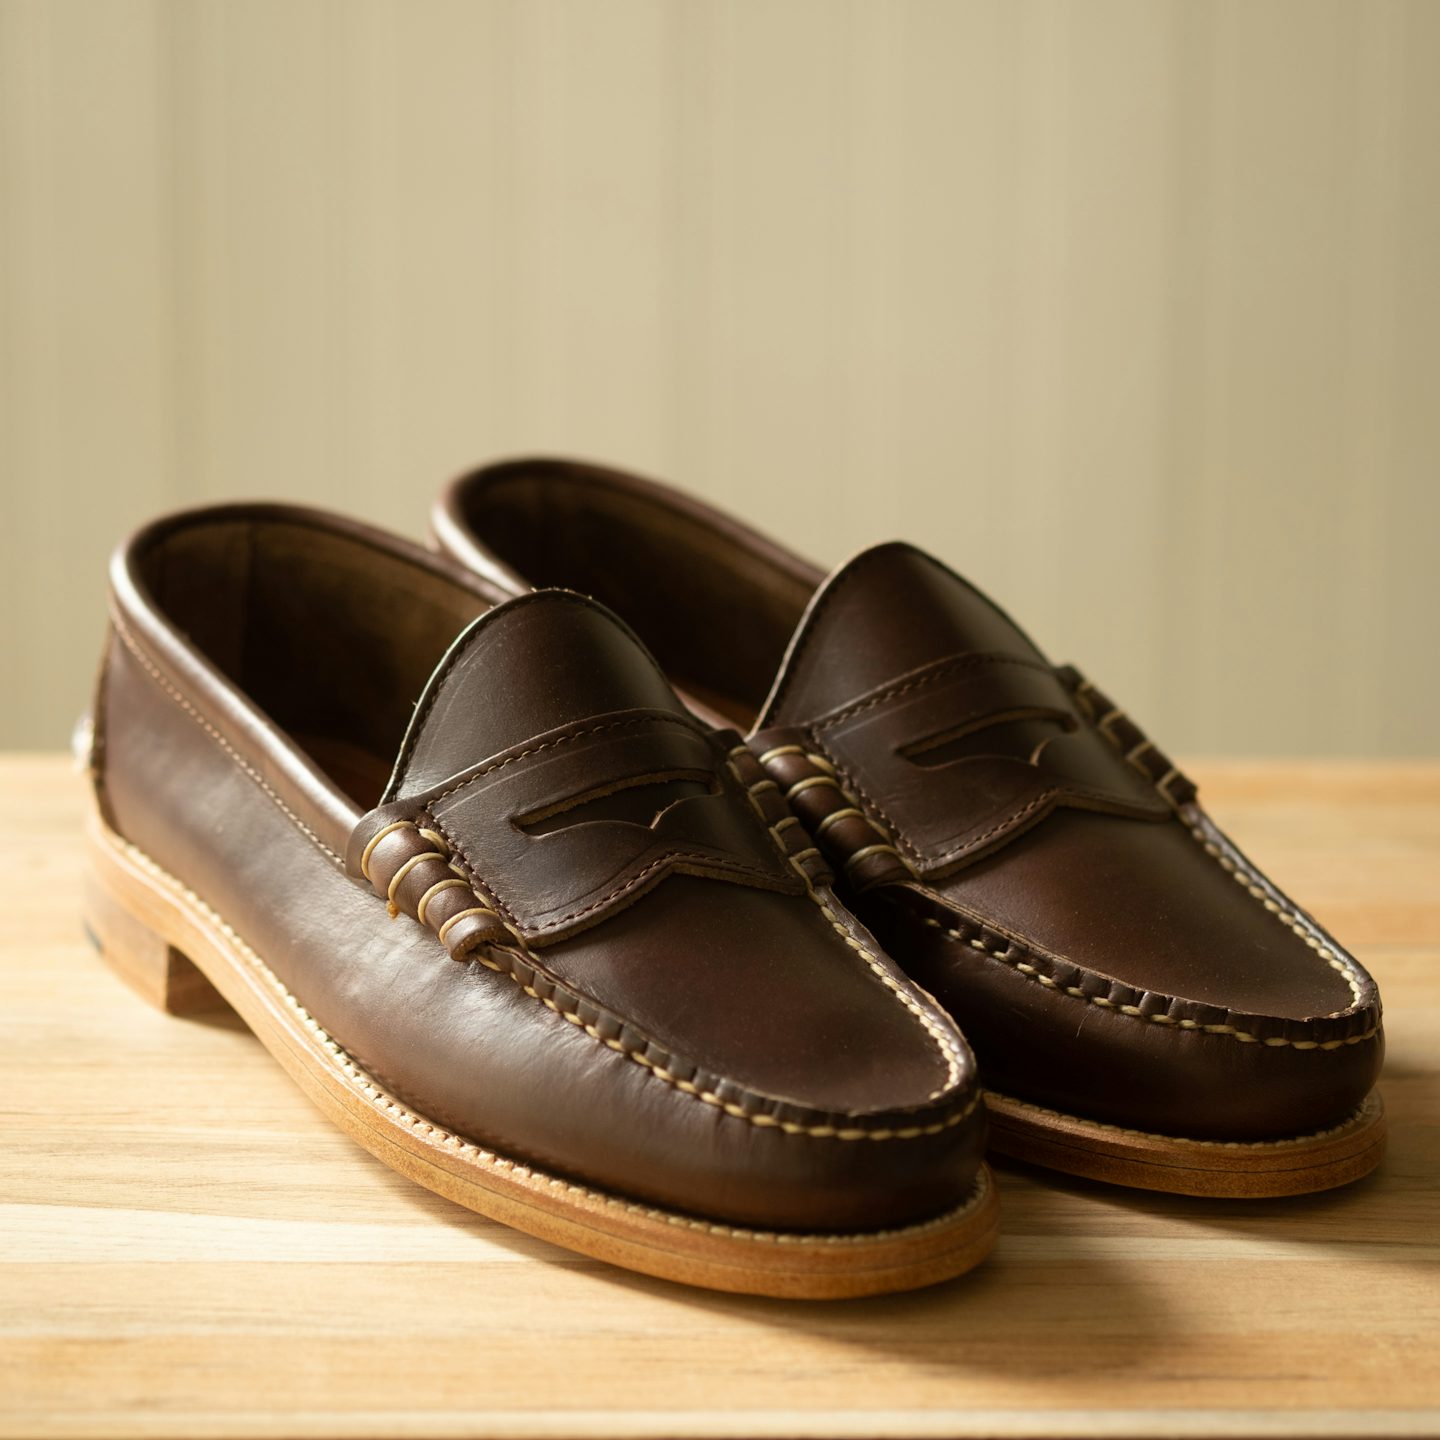 Teenageår Regnfuld mirakel Beefroll Penny Loafer - Brown Chromexcel, Leather Sole with Dovetail  Toplift - Made in USA | Oak Street Bootmakers